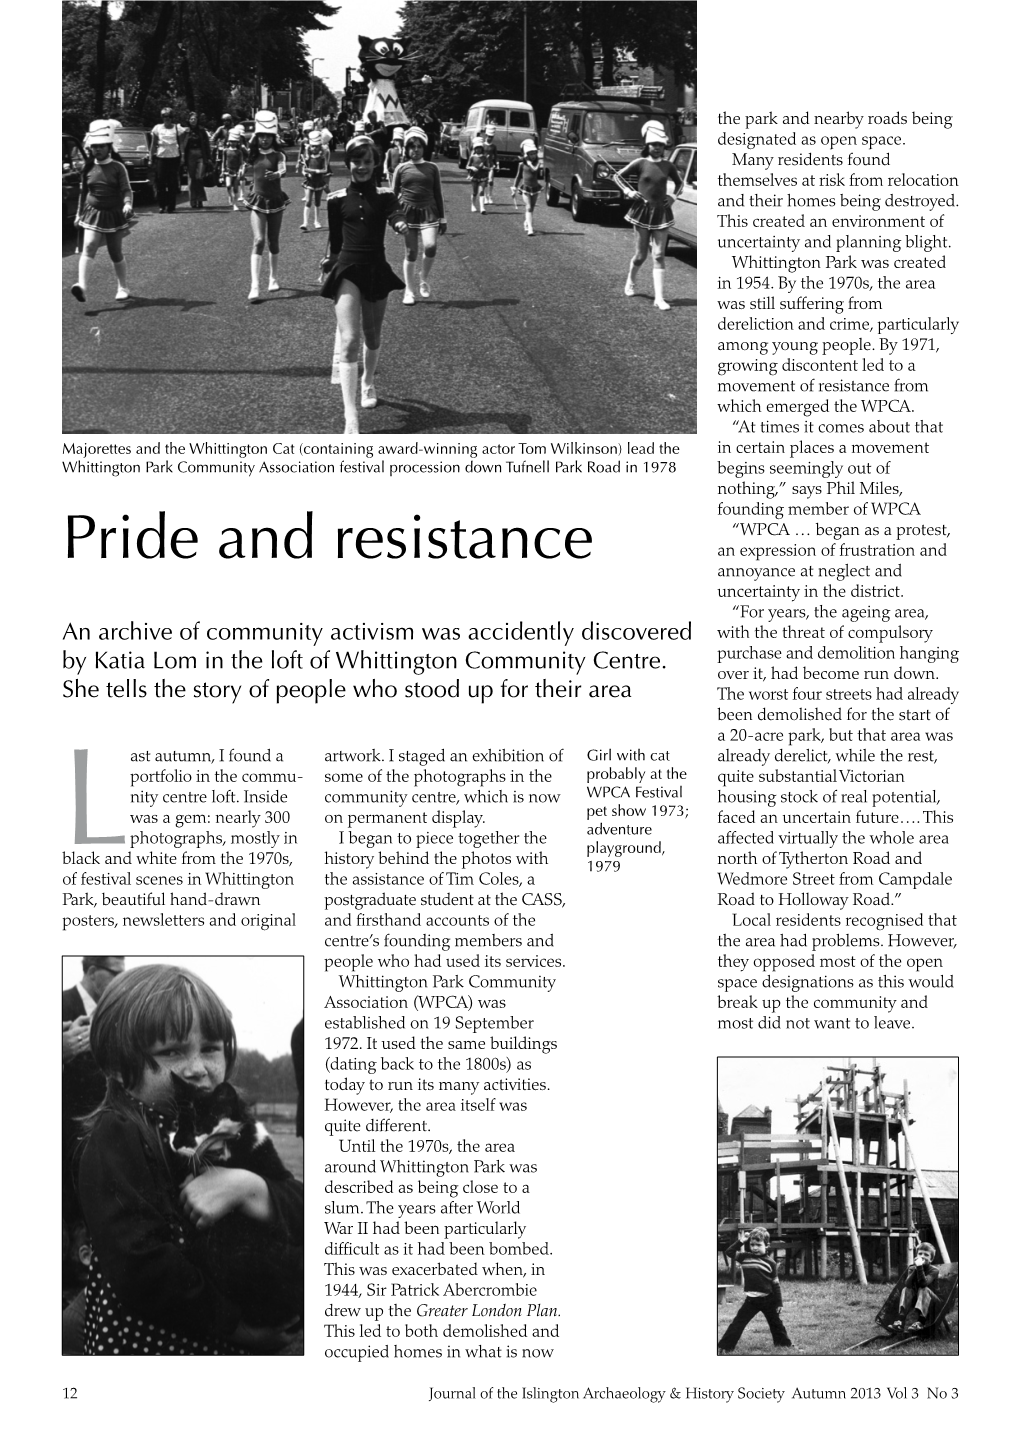 Pride and Resistance an Expression of Frustration and Annoyance at Neglect and Uncertainty in the District